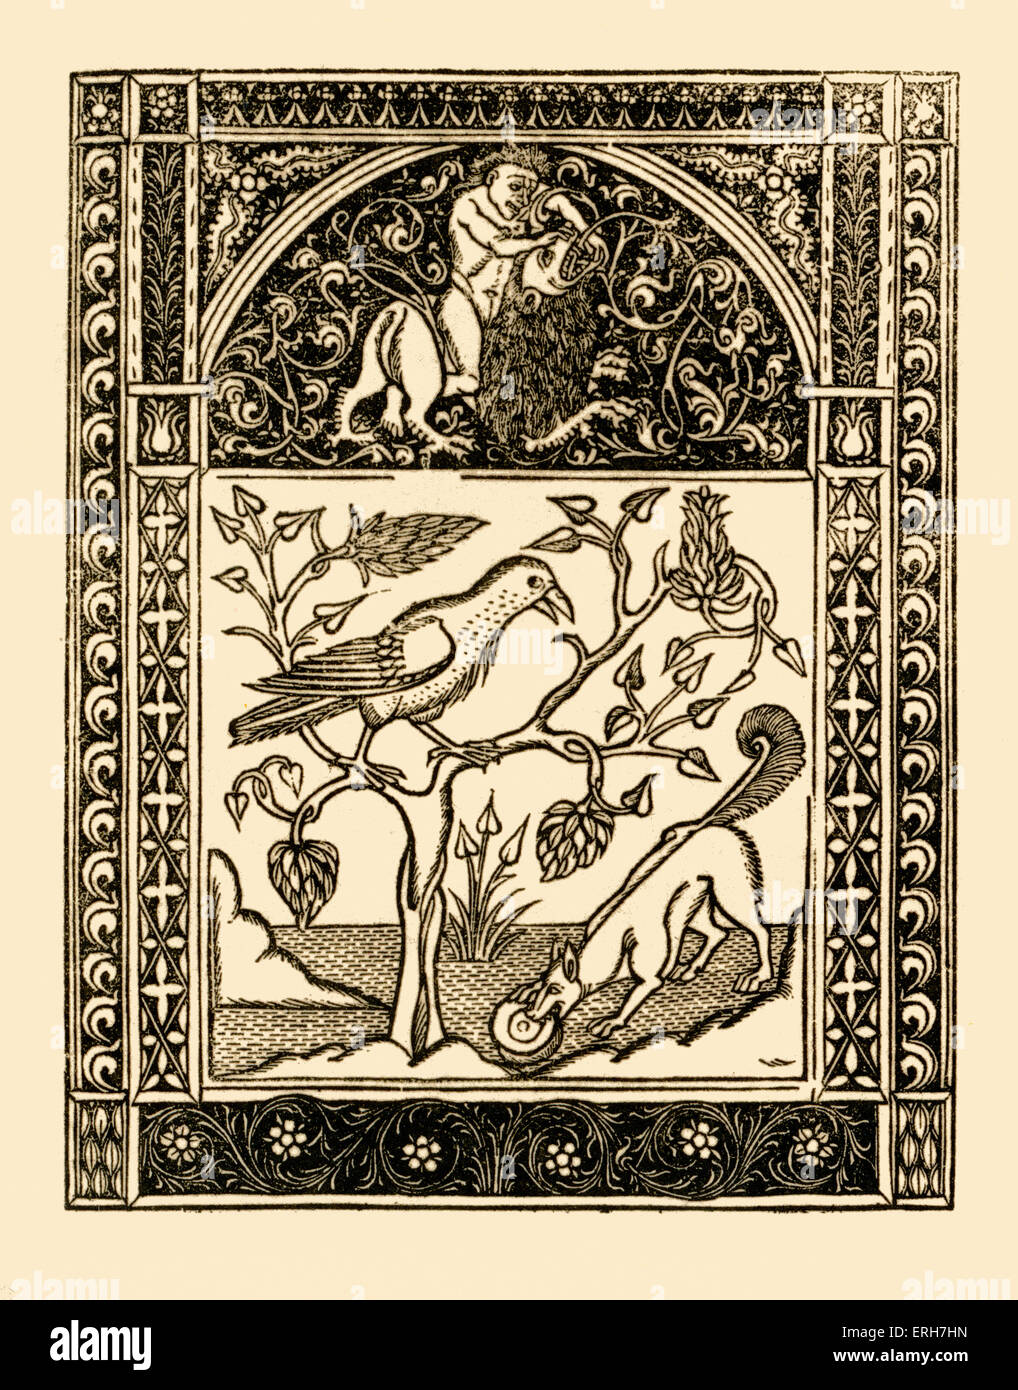 Aesop 's fables: The Fox and The Crow. Illustration after 1485 edition printed in Naples by German printers for Francesco del Stock Photo